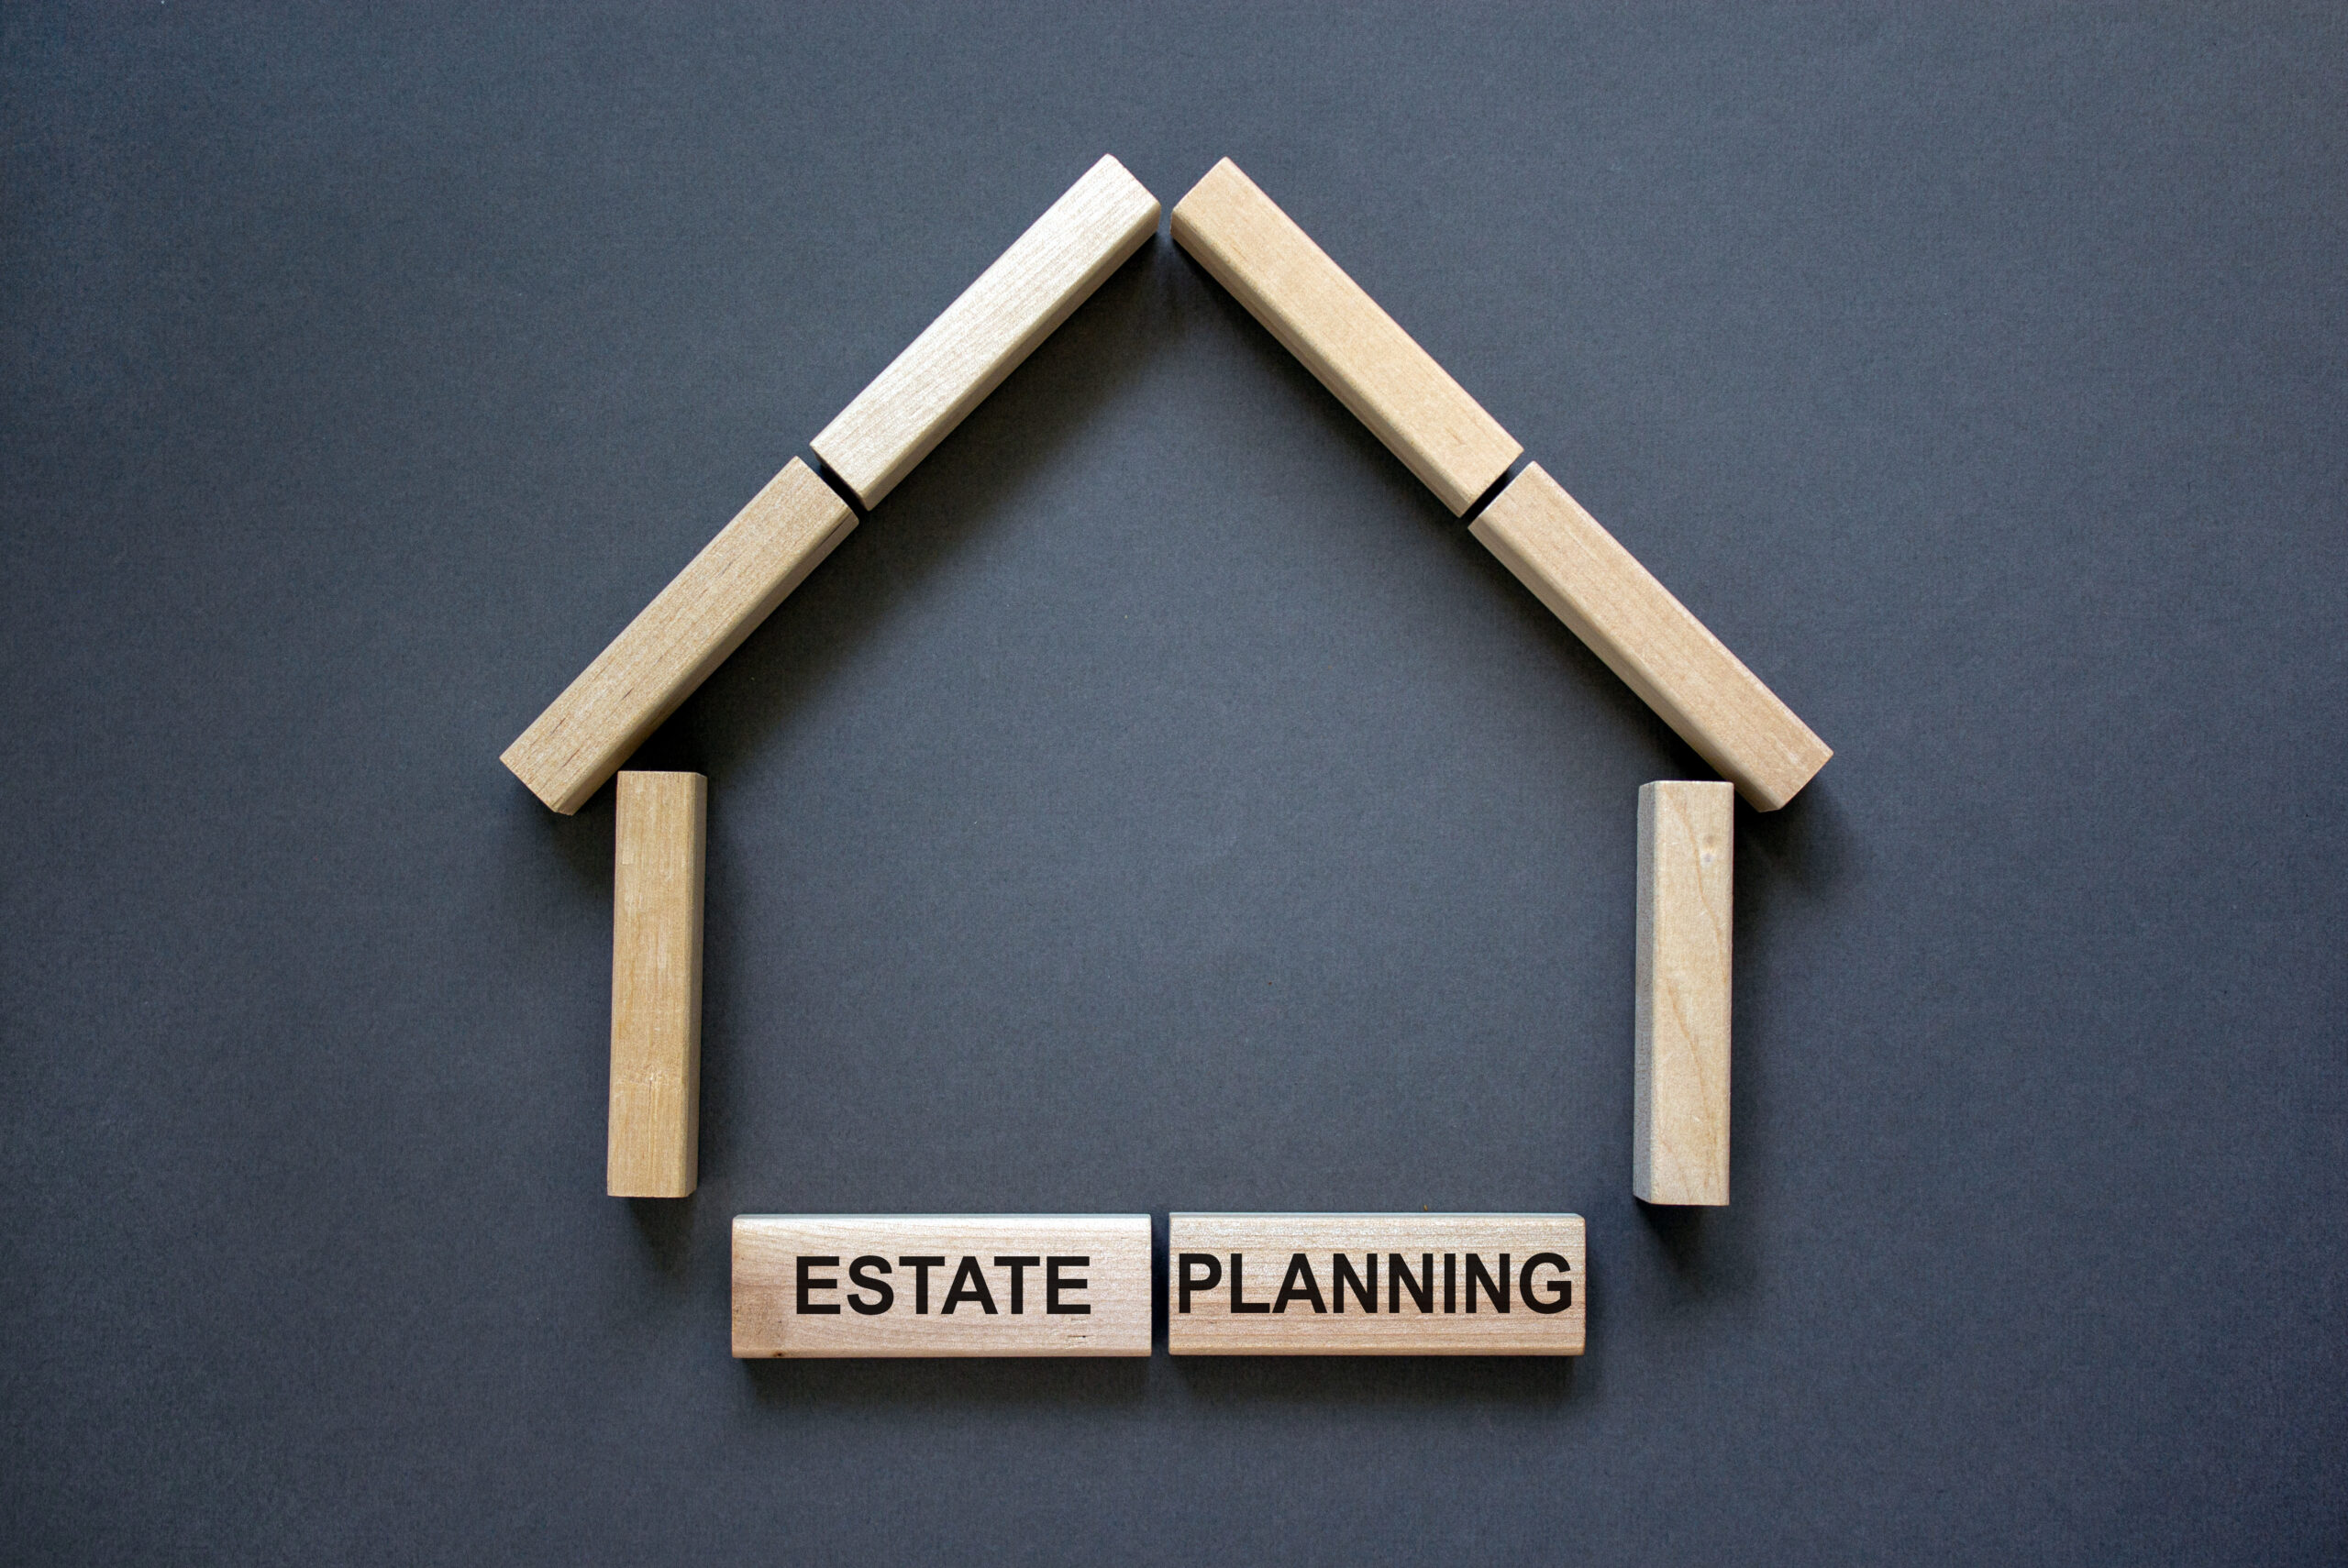 Wooden blocks in the outline of a house with "Estate Planning" written on the foundation blocks